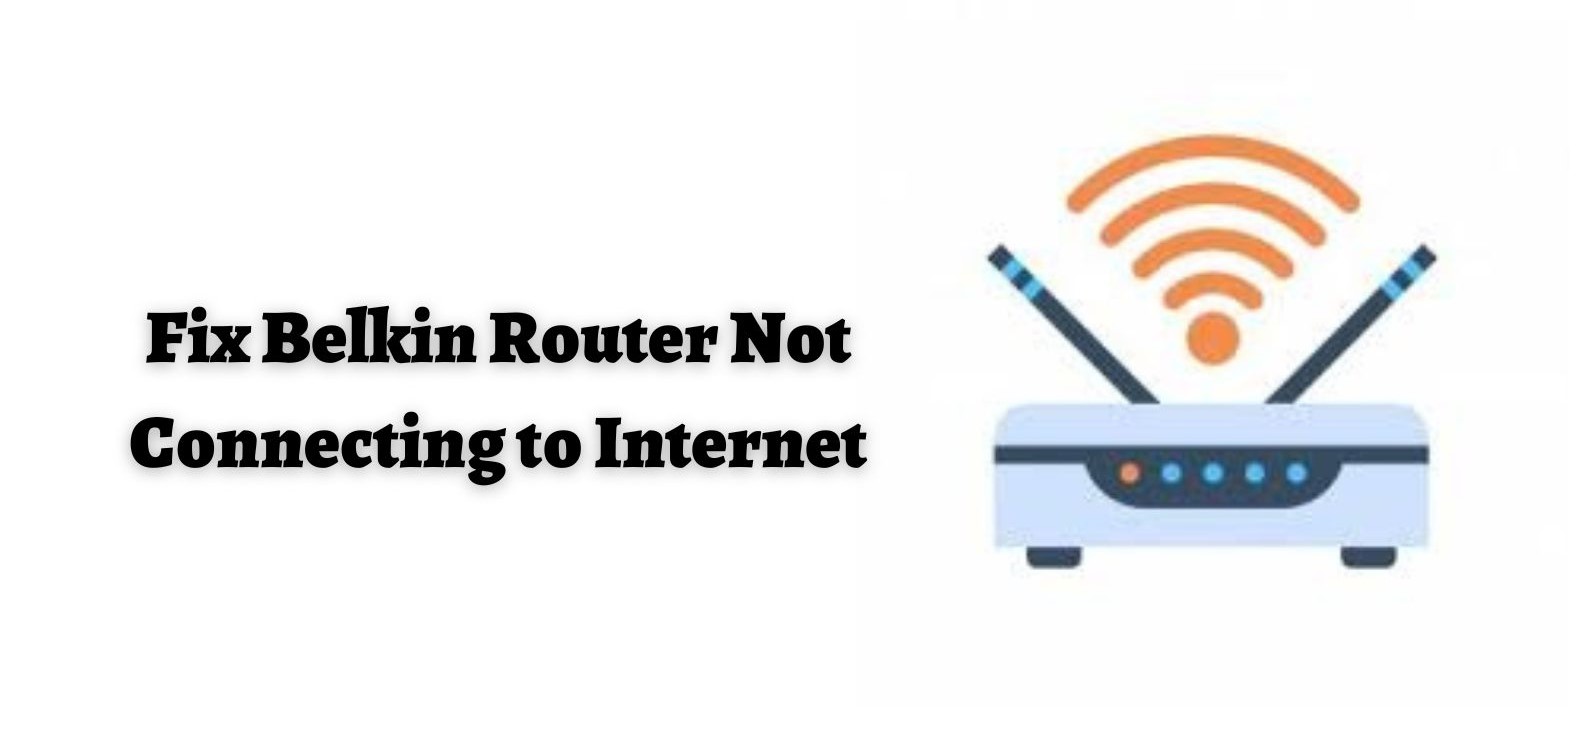 Fix Belkin Router Not Connecting to Internet